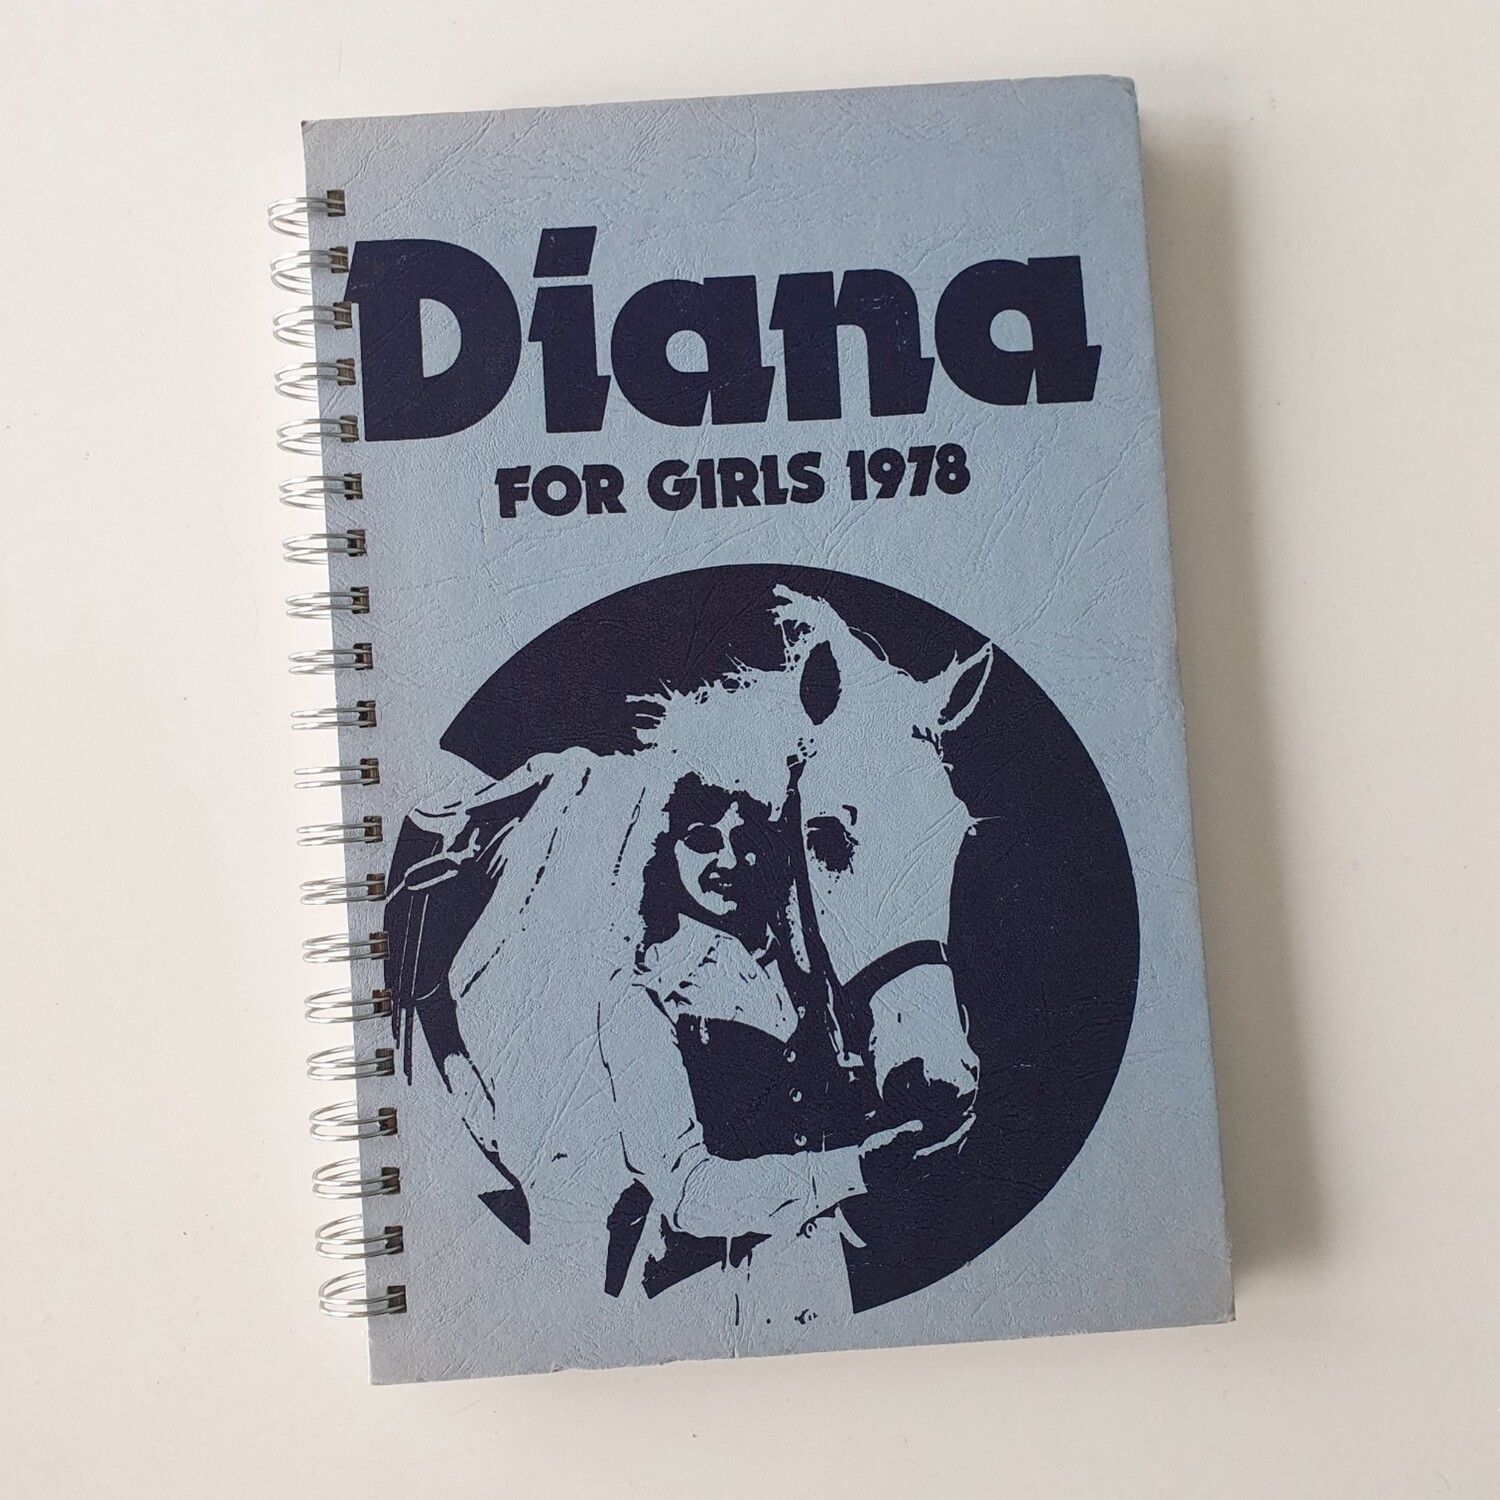 Diana for Girls 1978 plain paper notebook - horse, pony